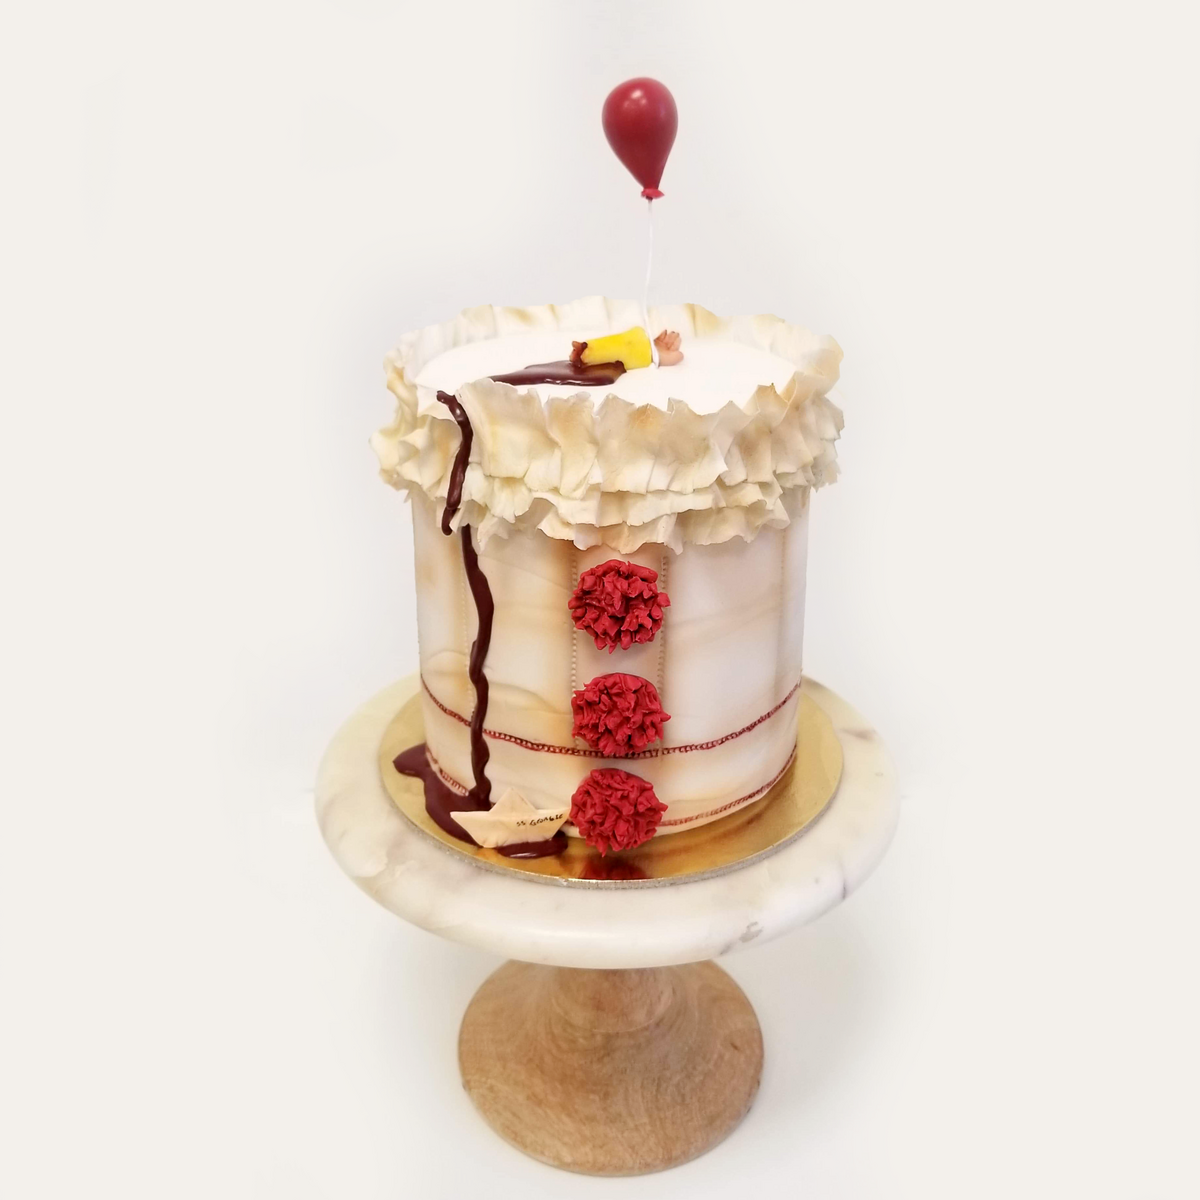 whippt cake auction Oct 24 2019 It 4